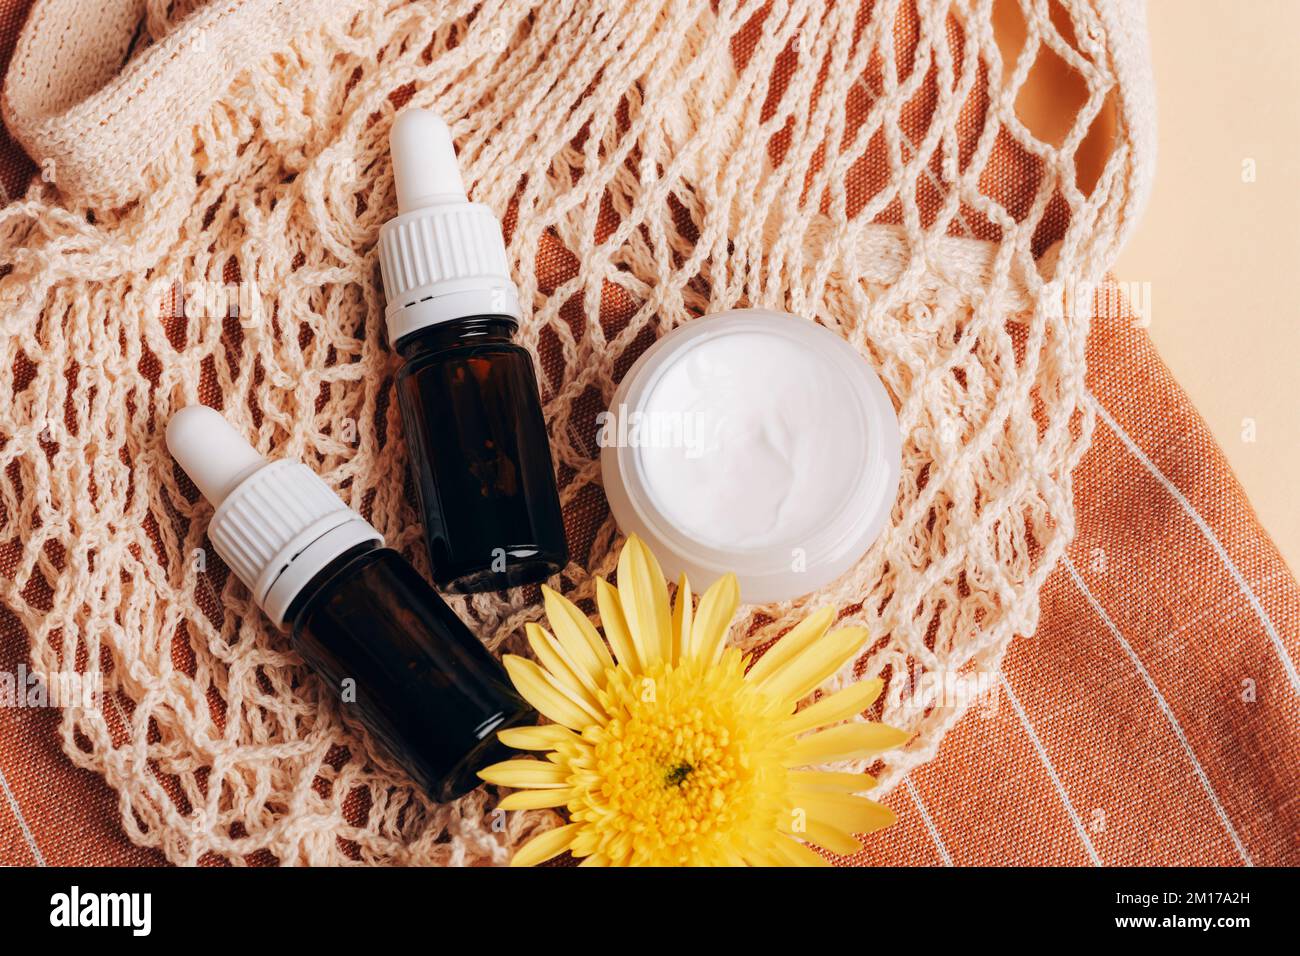 Cosmetic bottles and cream jar with yellow chrysanthemum flower on mesh bag. Organic spa cosmetic beauty product. Zero waste concept. Stock Photo